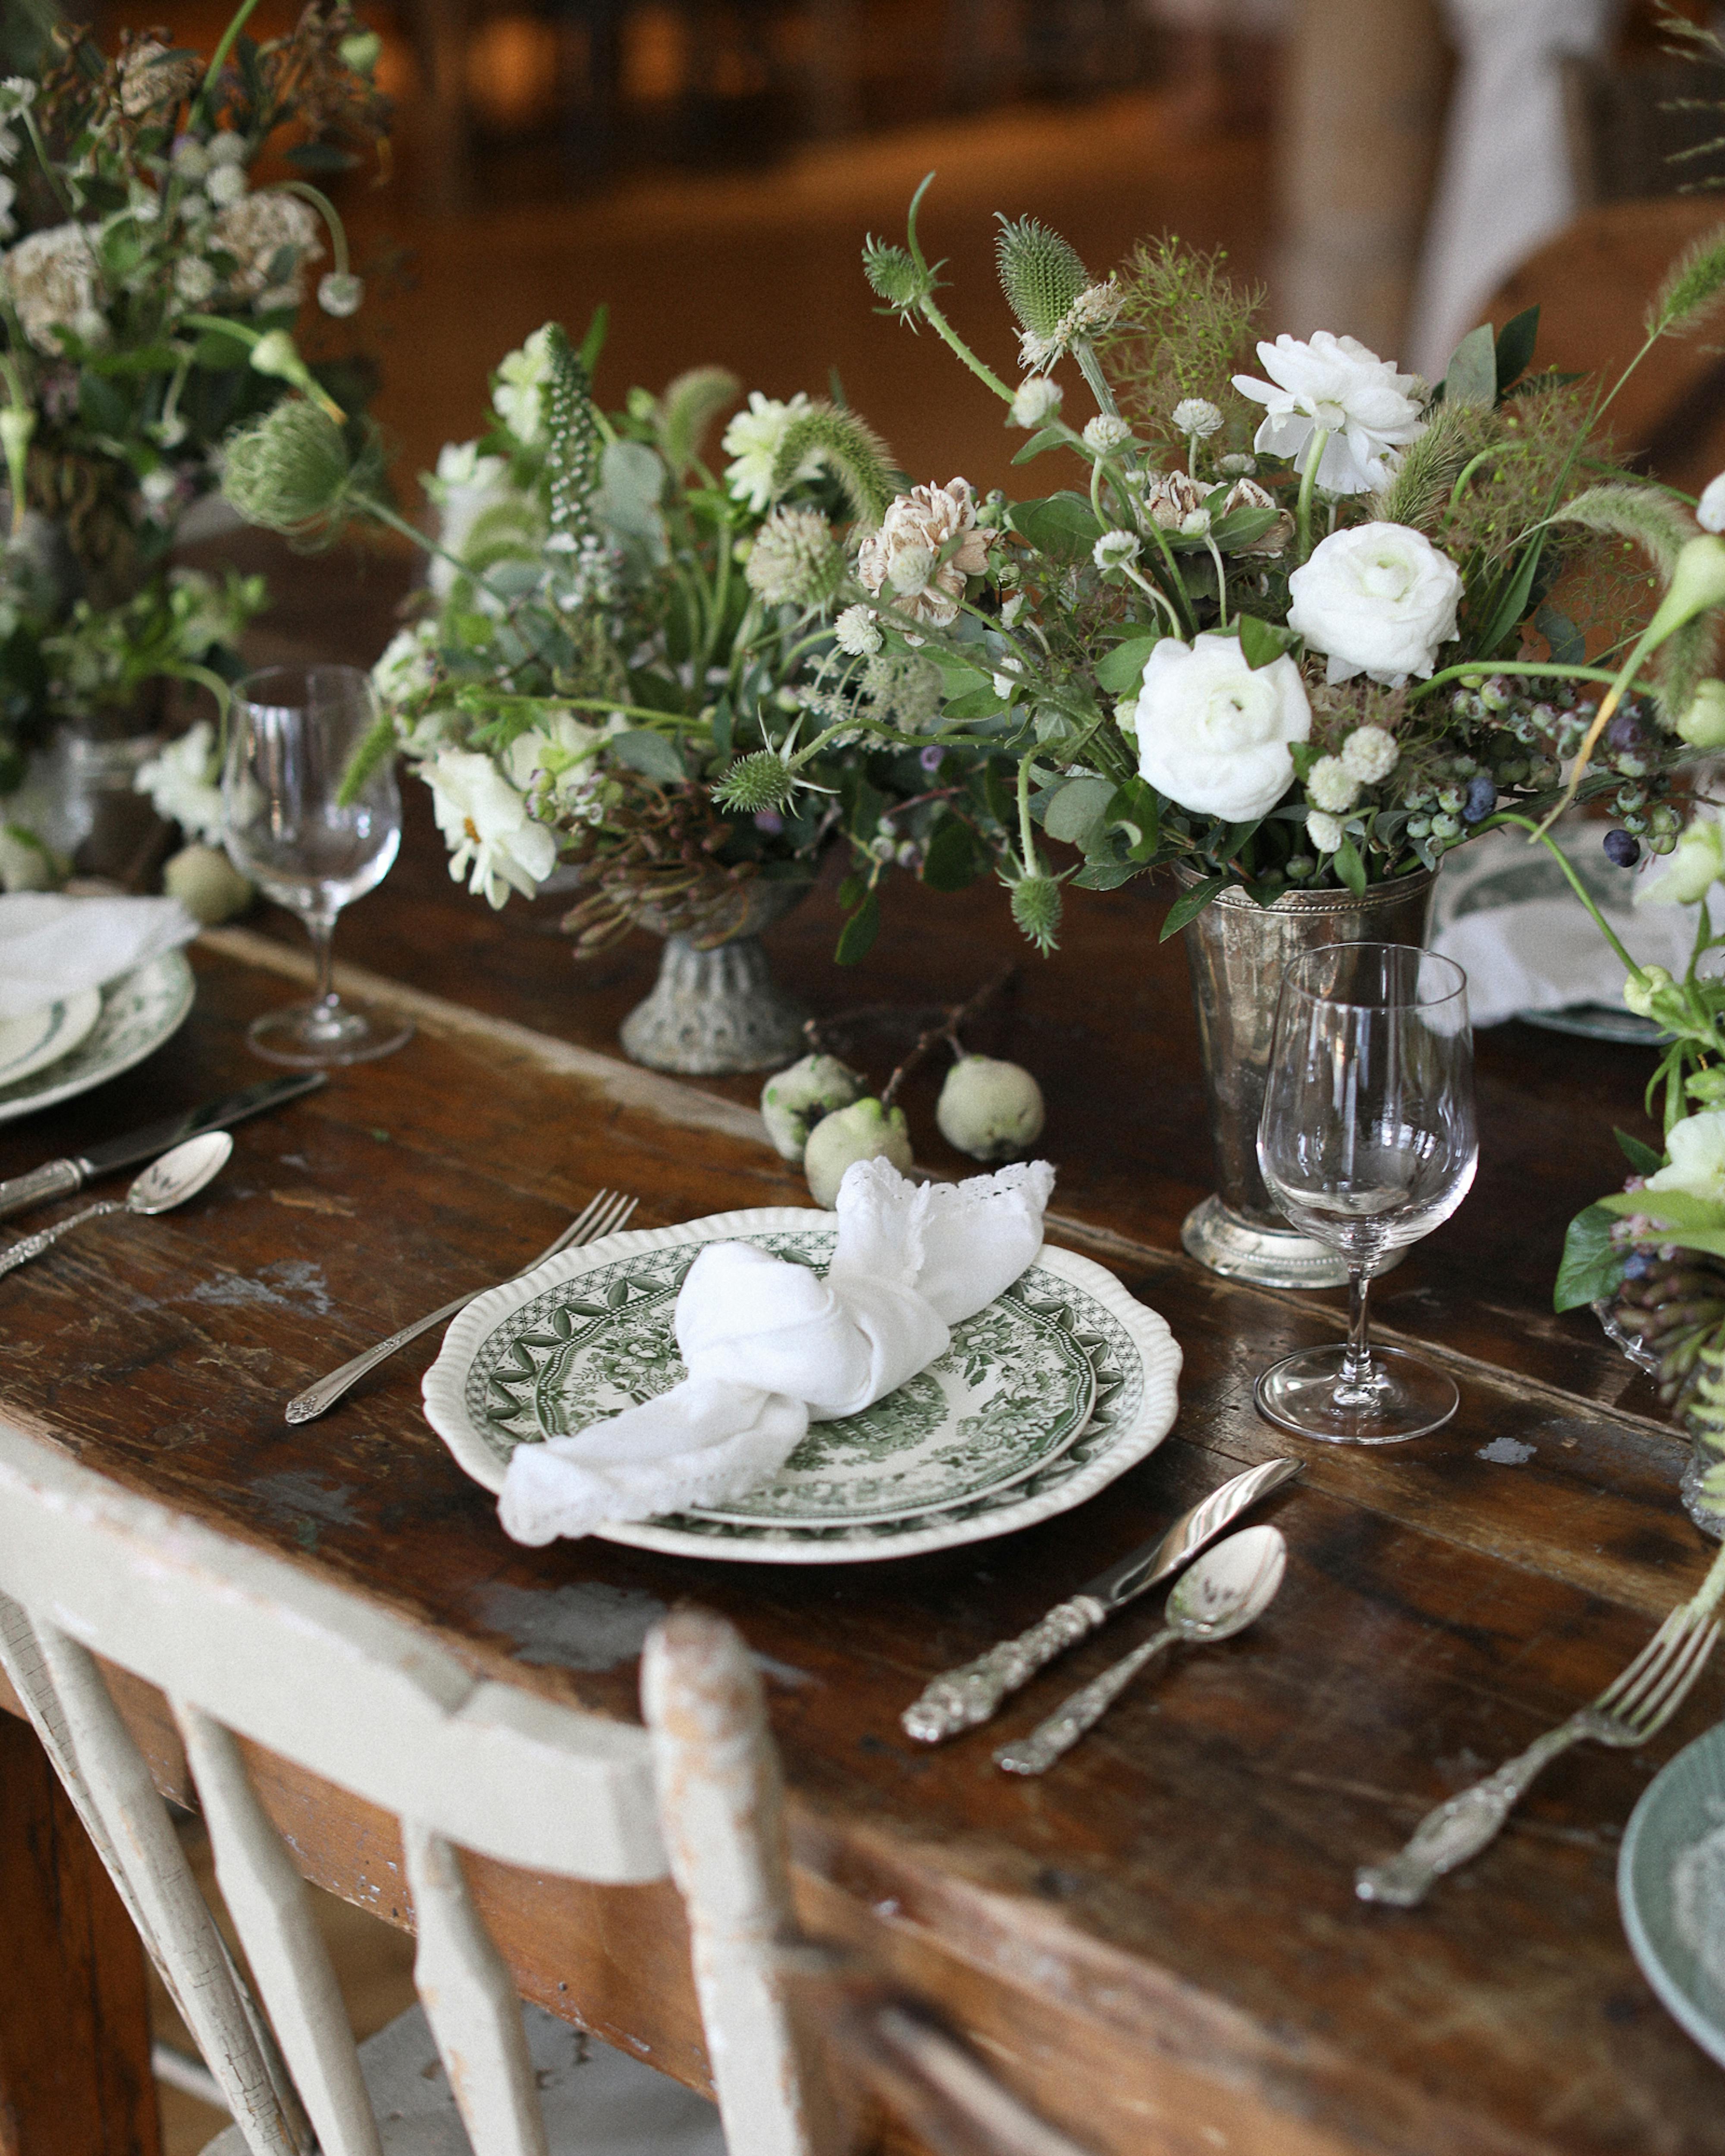 rustic place setting on table with green and white plates, florals, and vintage cutlery